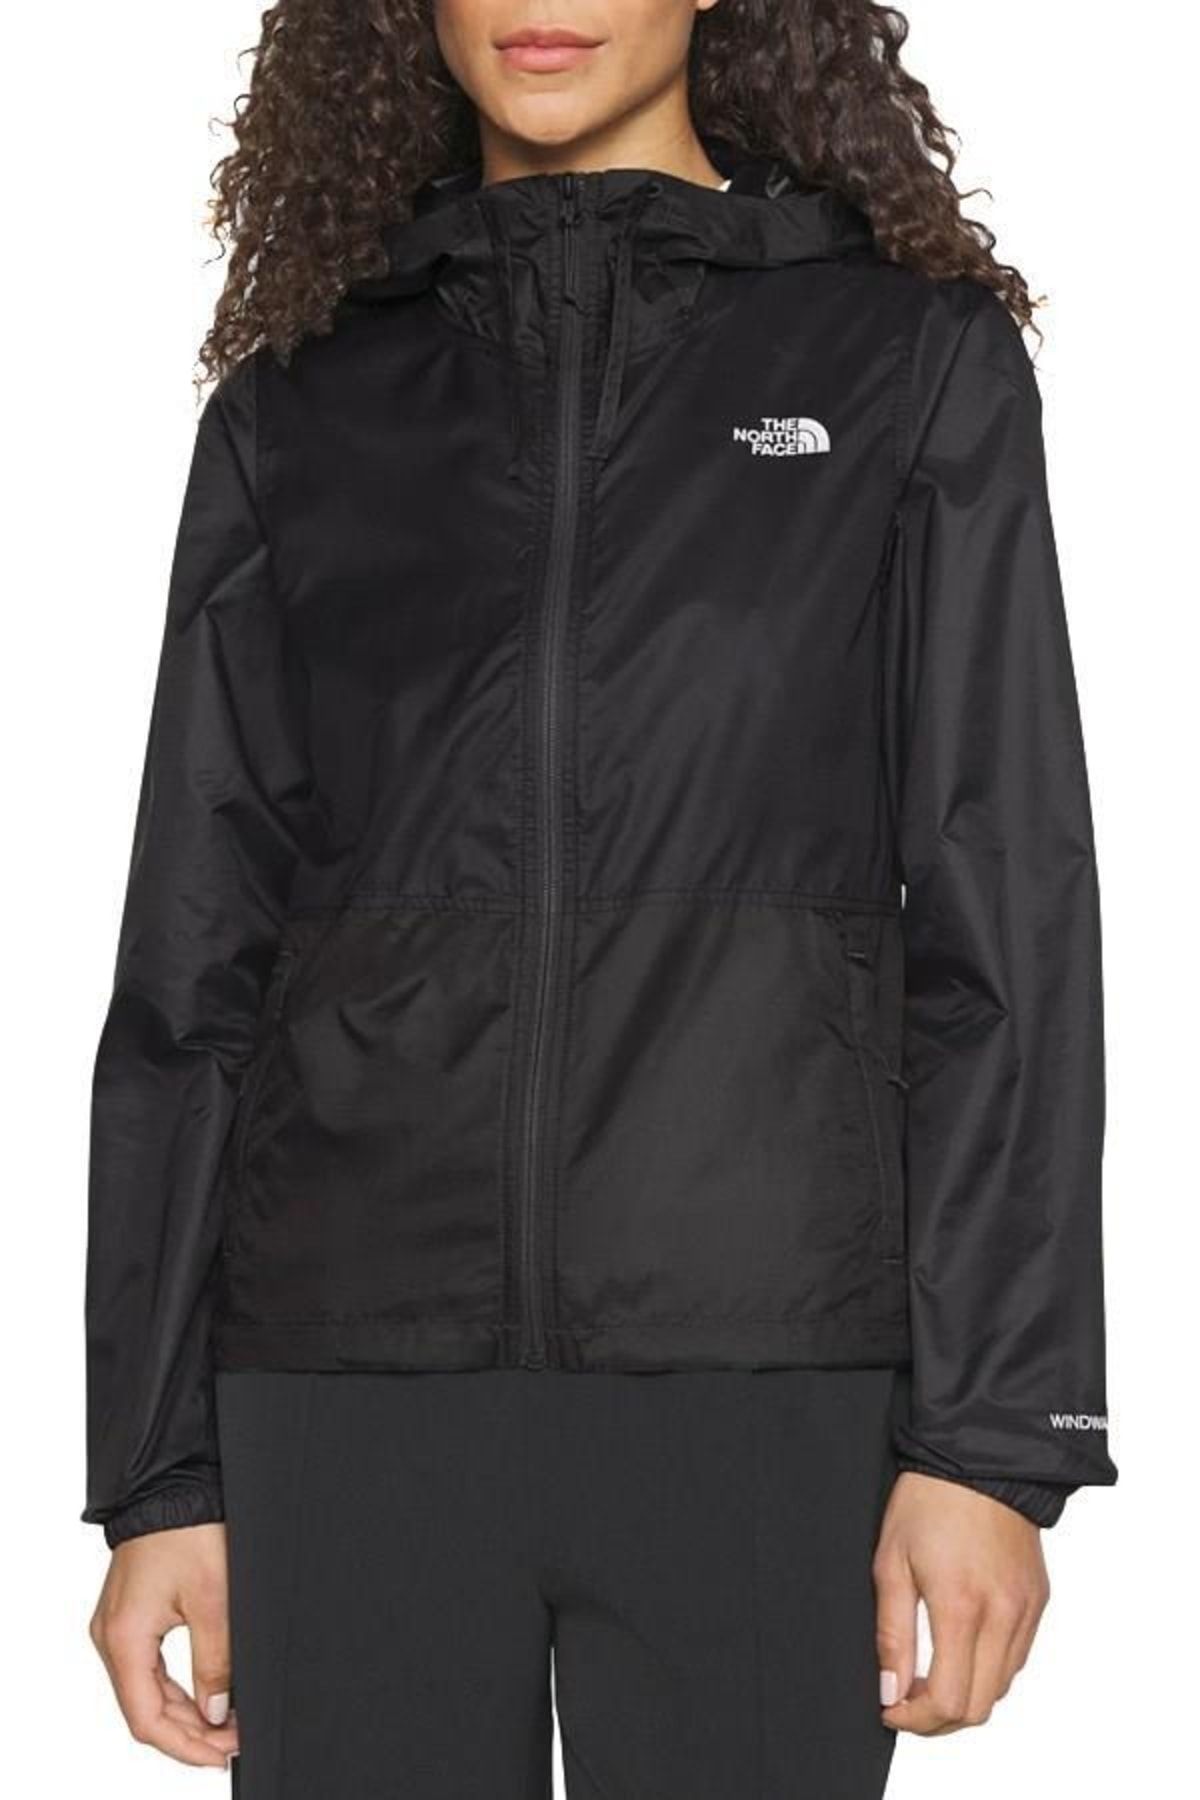 The North Face W Cyclone Jacket 3 Nf0a82r7mn81